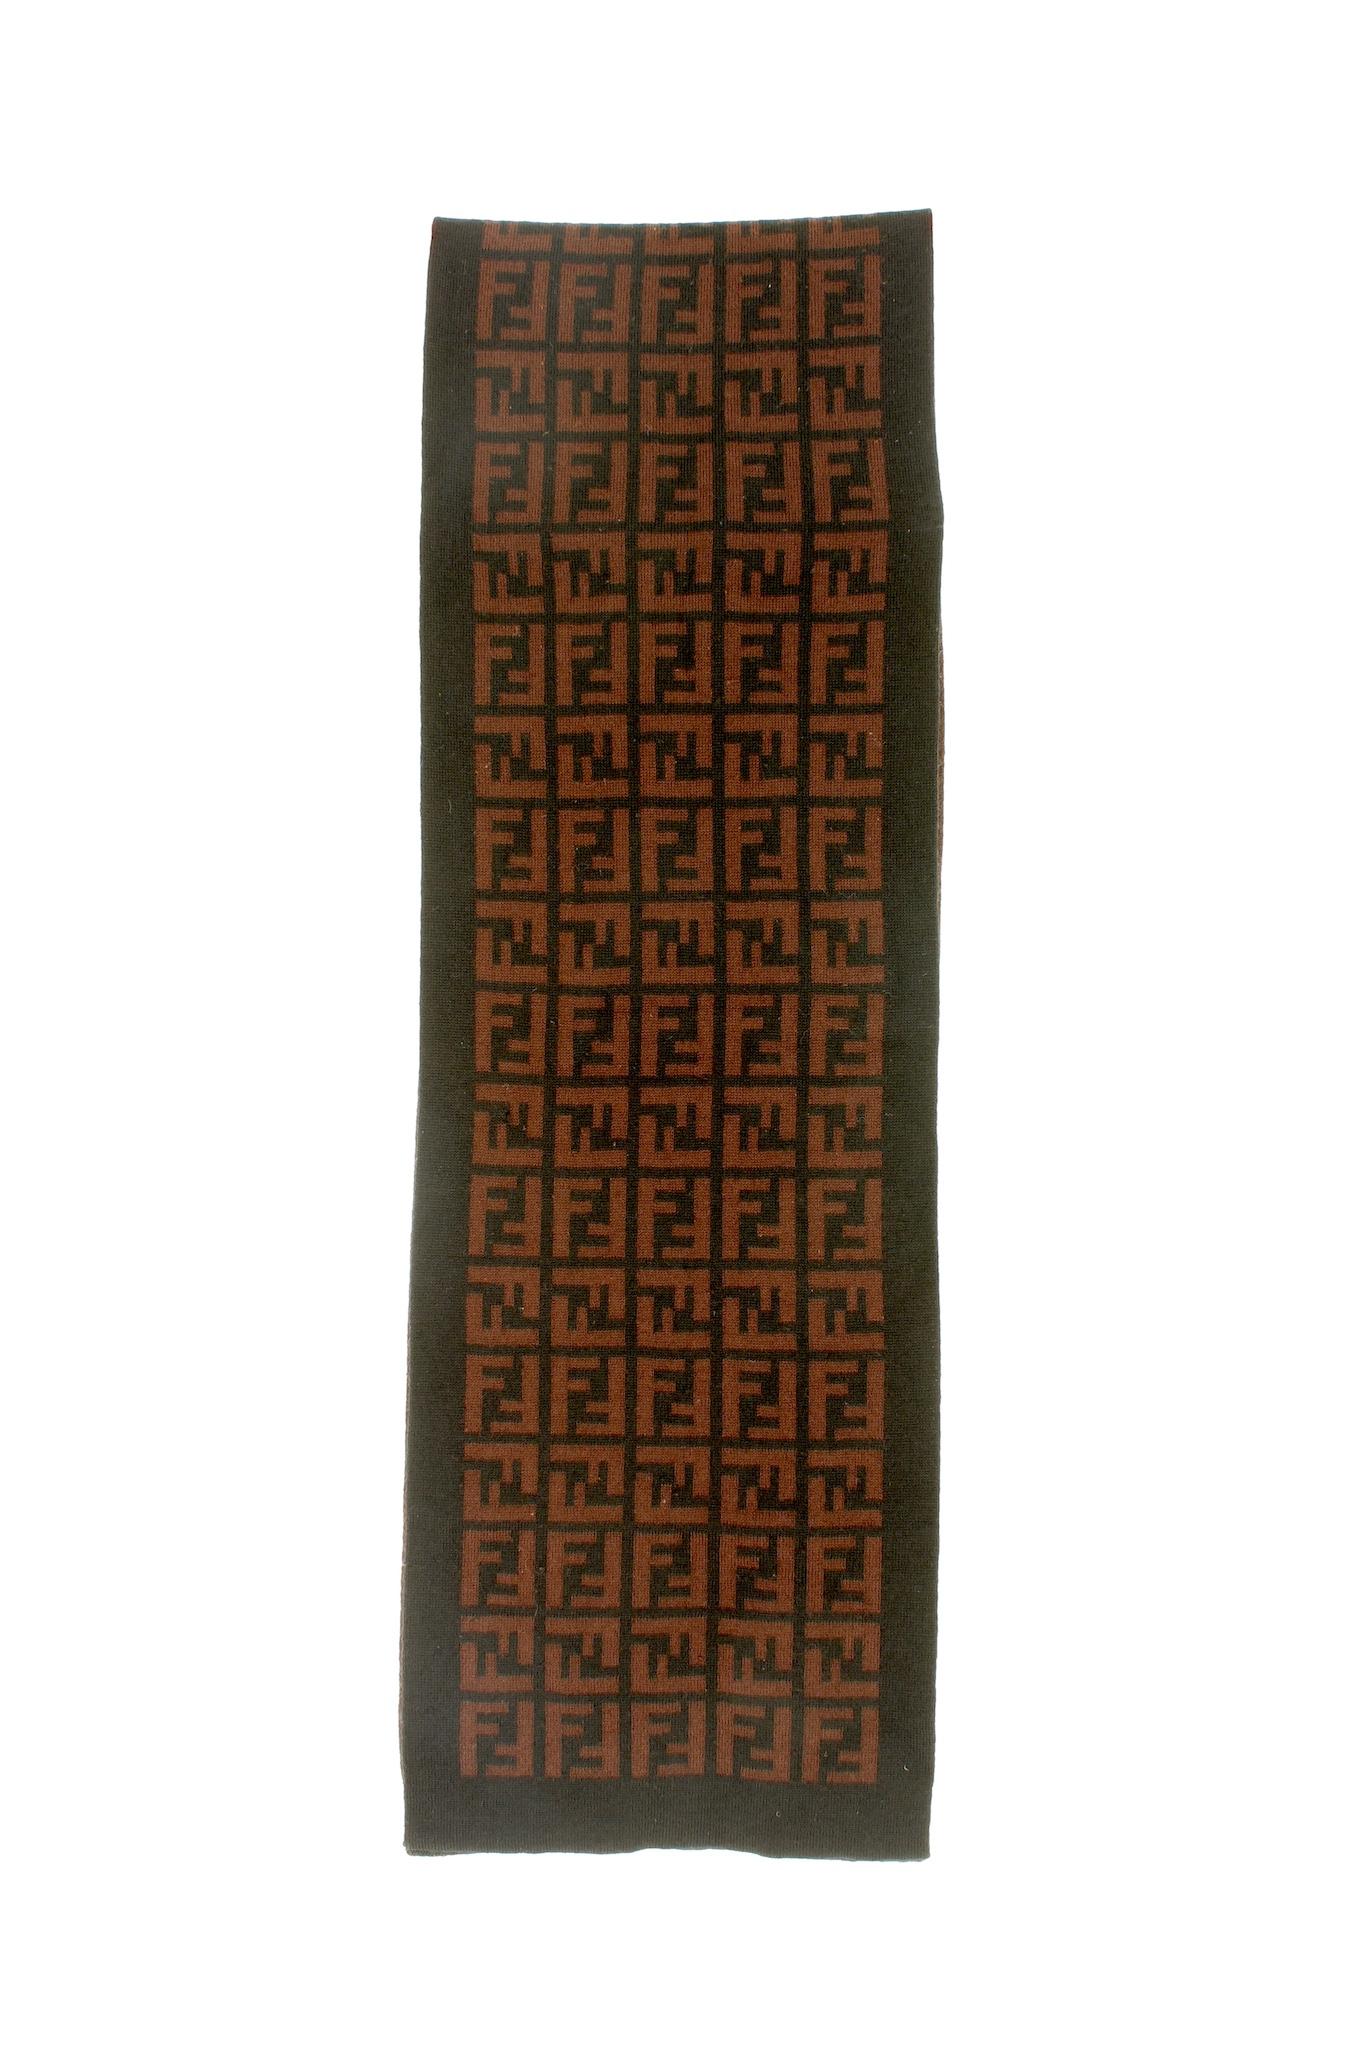 Fendi pumpkin vintage scarf from the 2000s. Monogram pattern in brown and black. 100% wool fabric. Made in Italy. The scarf is overall in excellent condition, there is a small hole on the edge. 

Measures: 157 x 26 cm